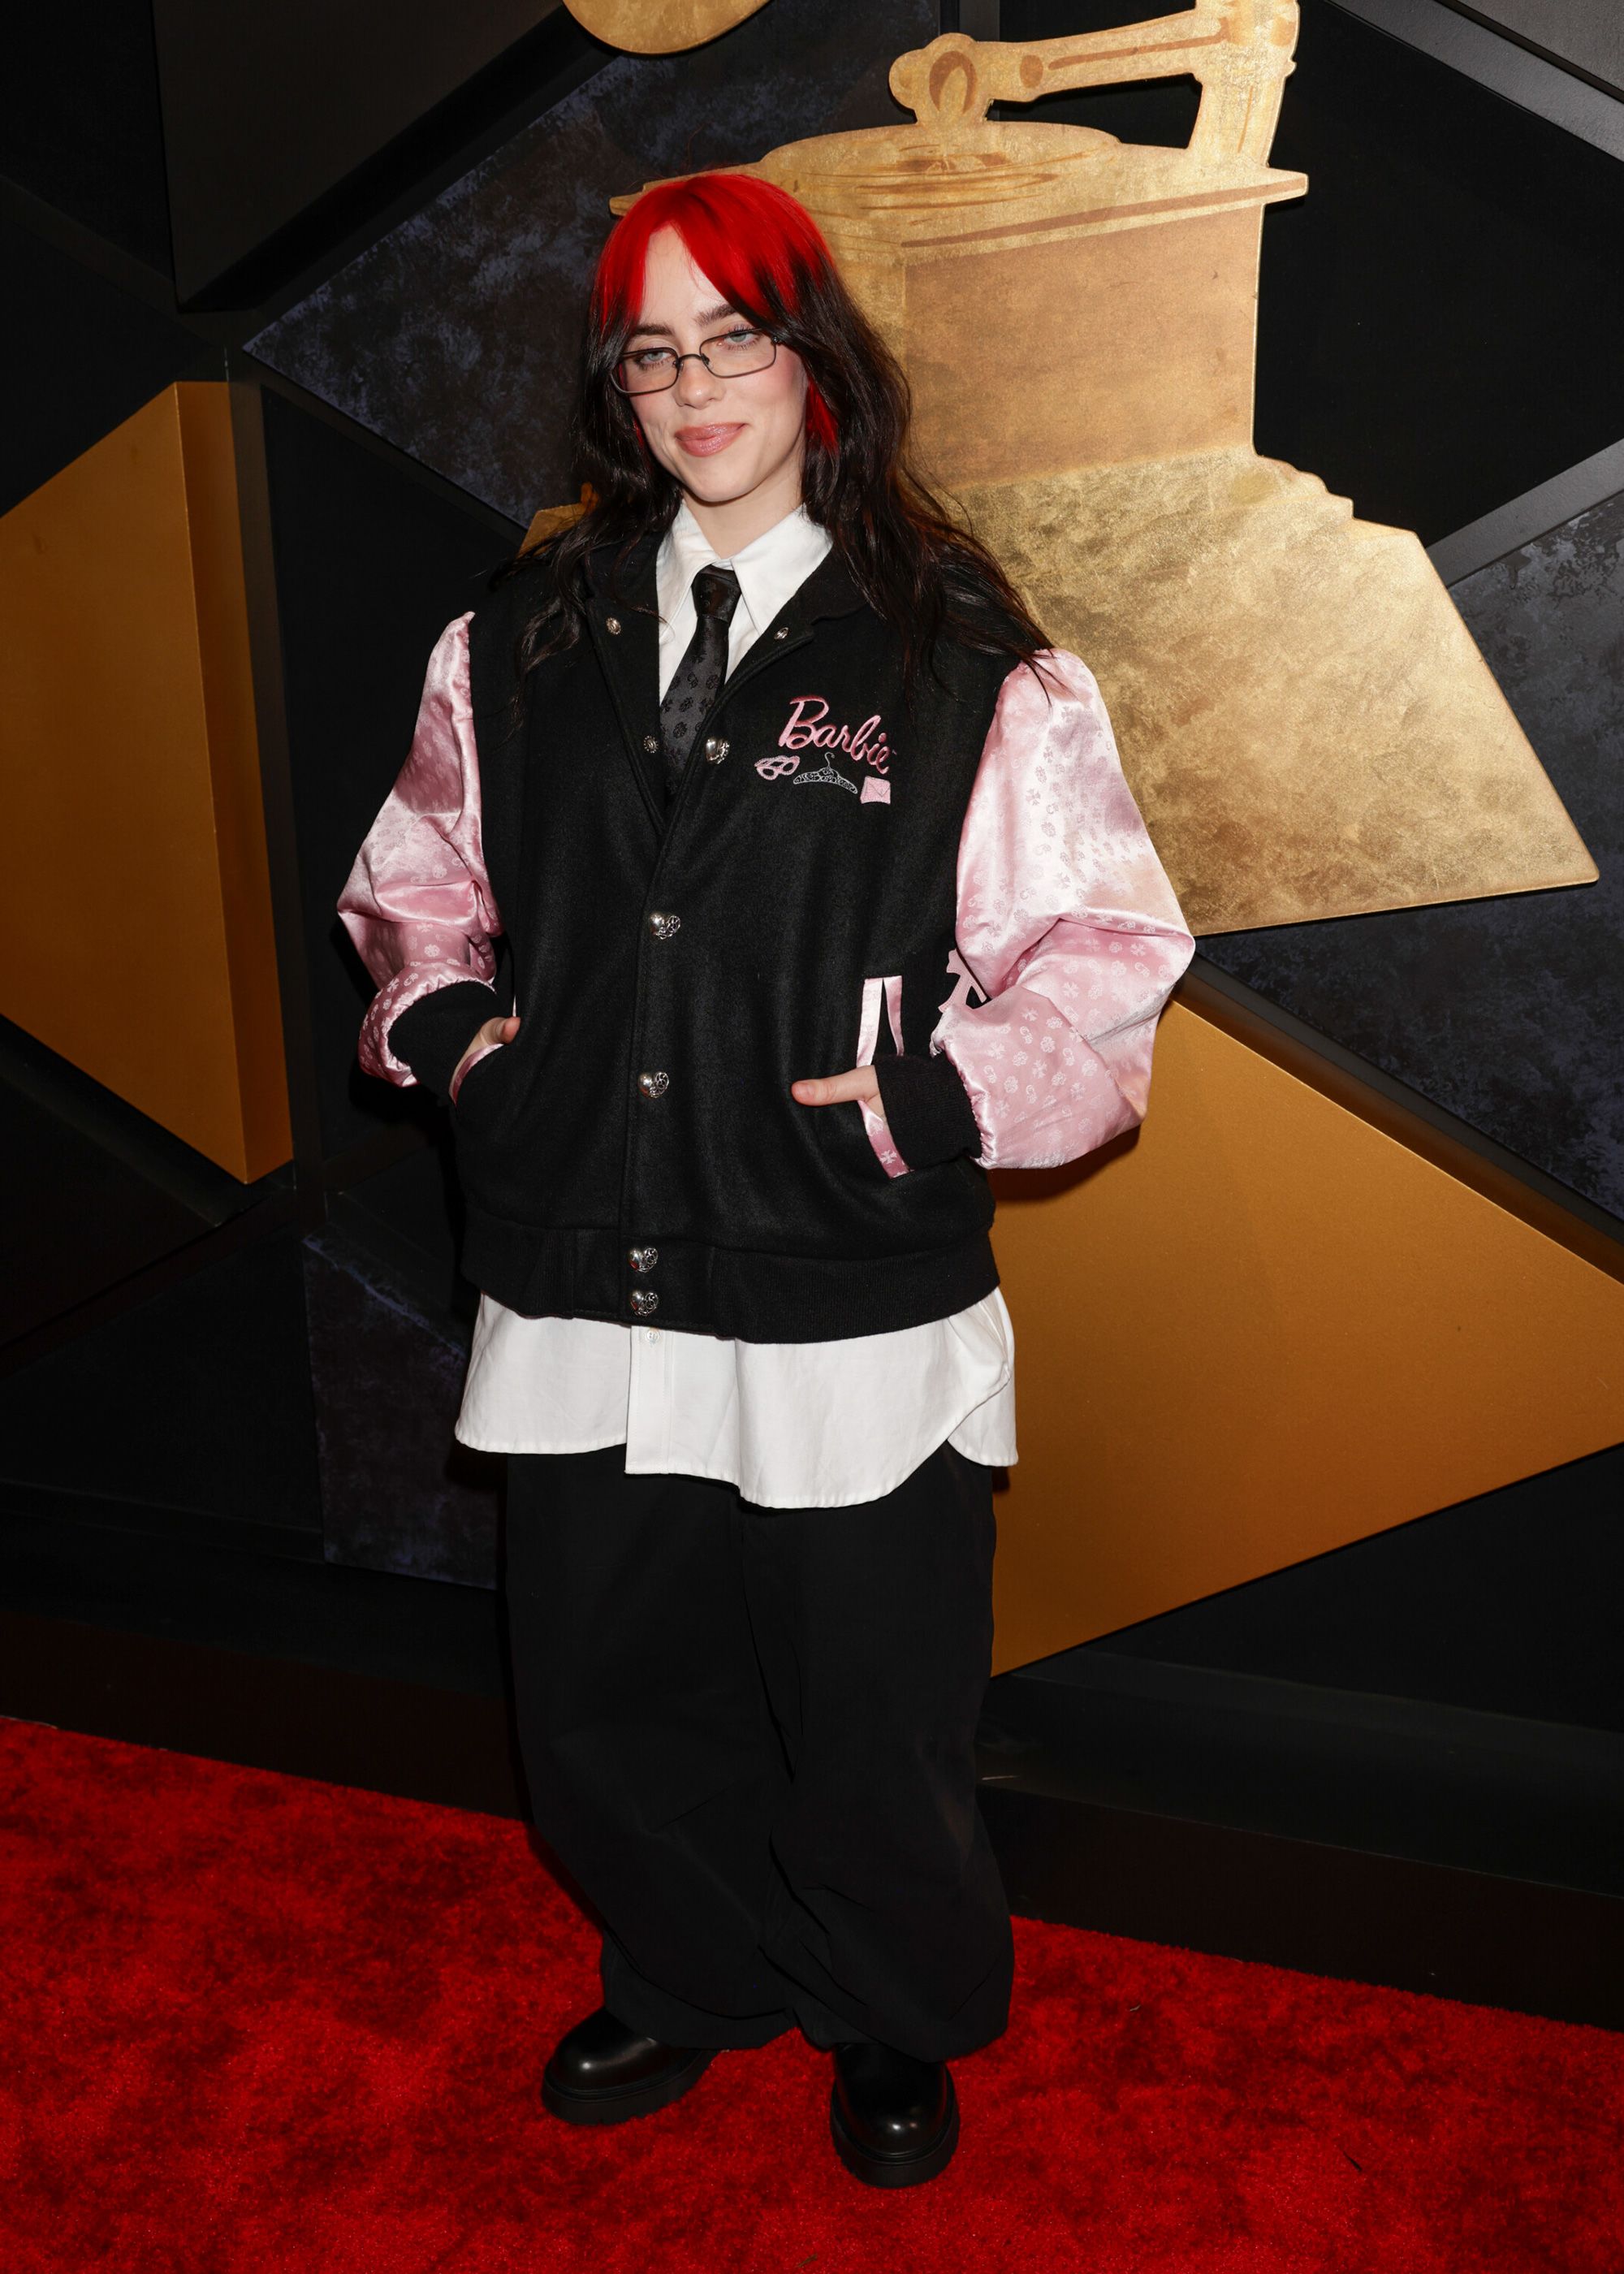 Billie Eilish, who shares a stylist with Margot Robbie, arrived in a Barbie varsity jacket by Chrome Hearts.